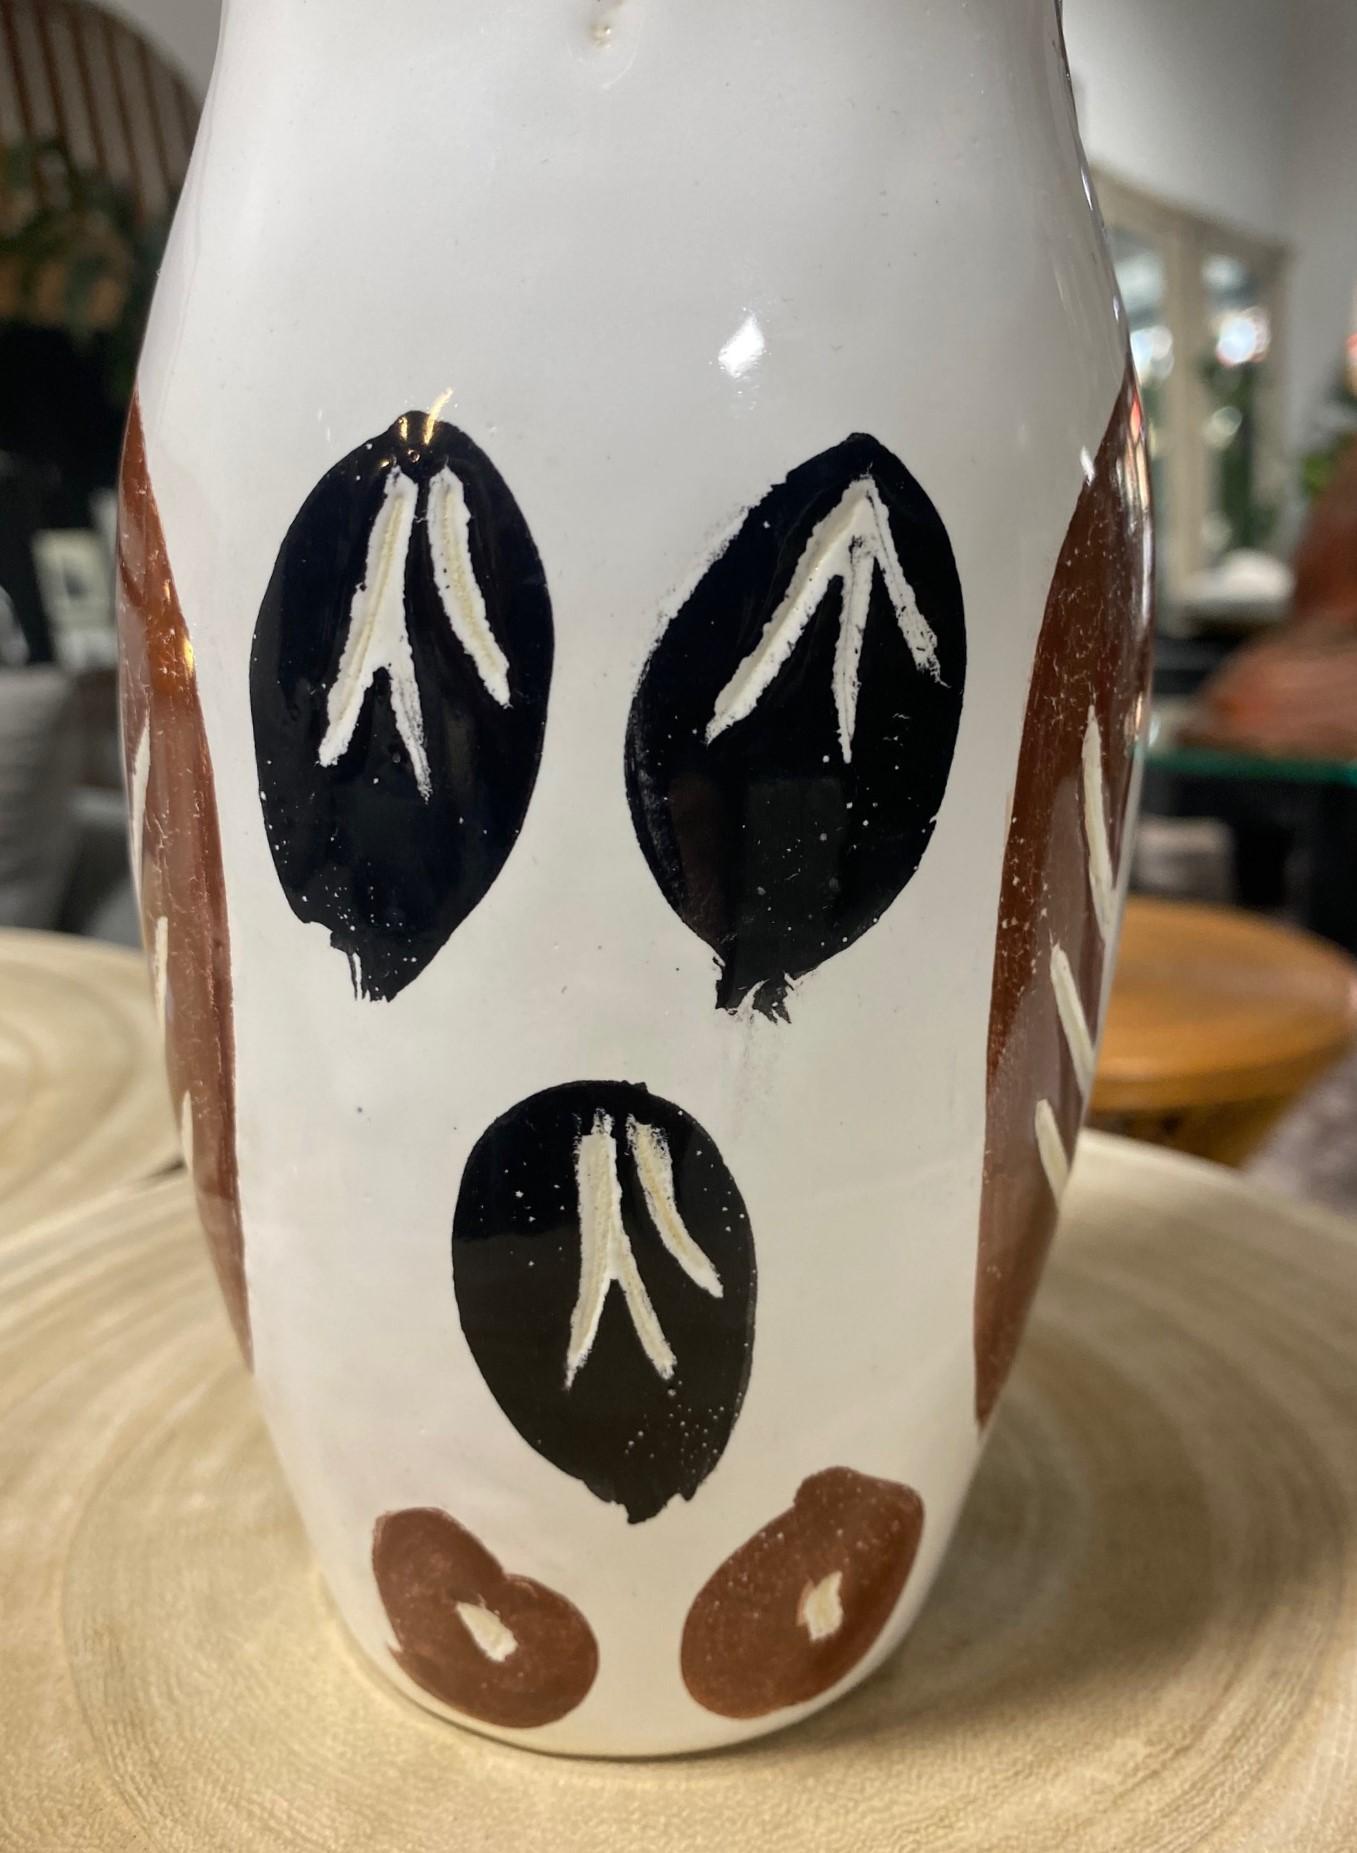 Mid-Century Modern Pablo Picasso Signed Limited Madoura Pottery Chouetton Owl Vase A.R. 135, 1952 For Sale